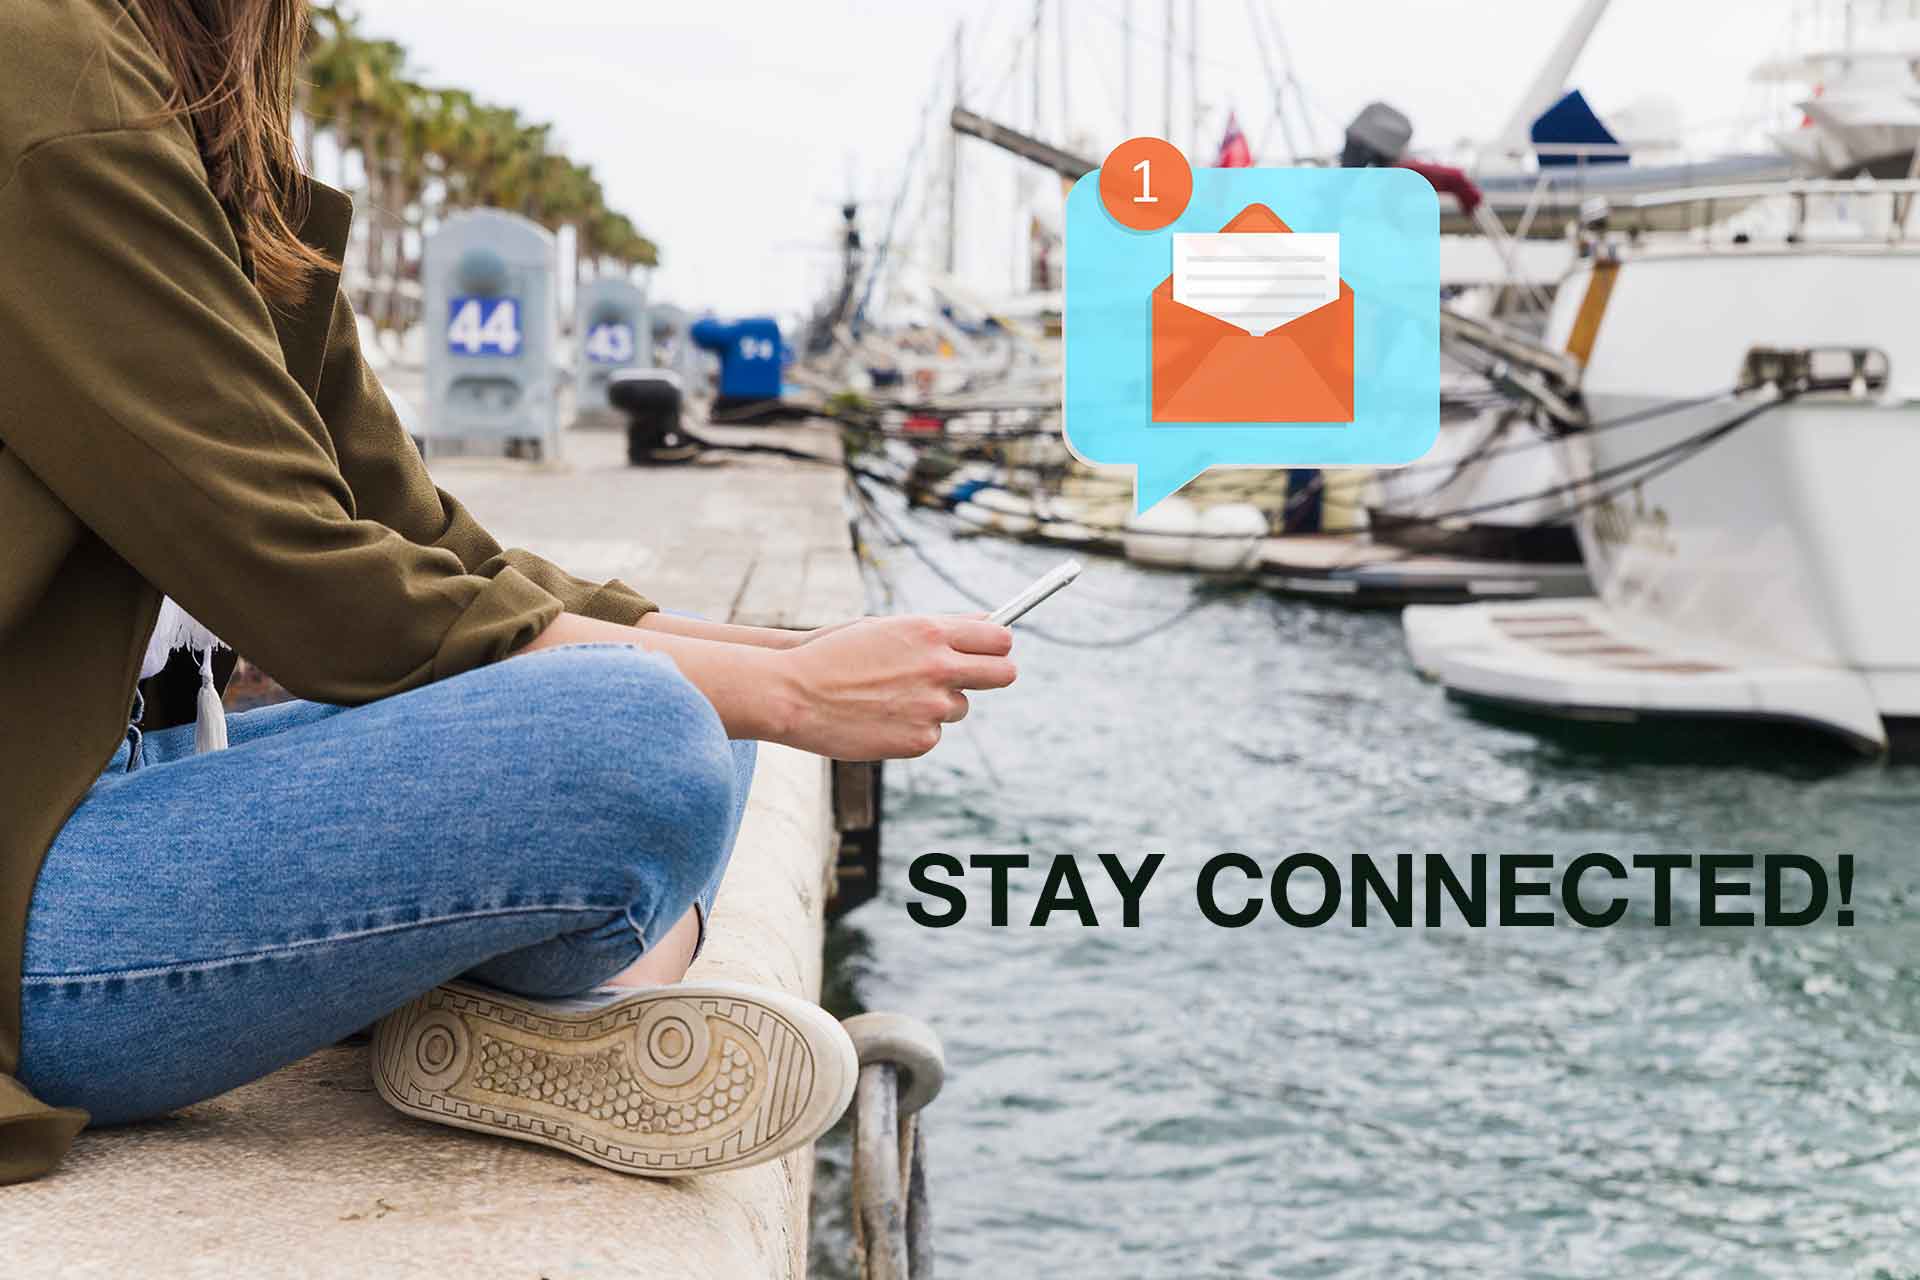 Stay Connected!